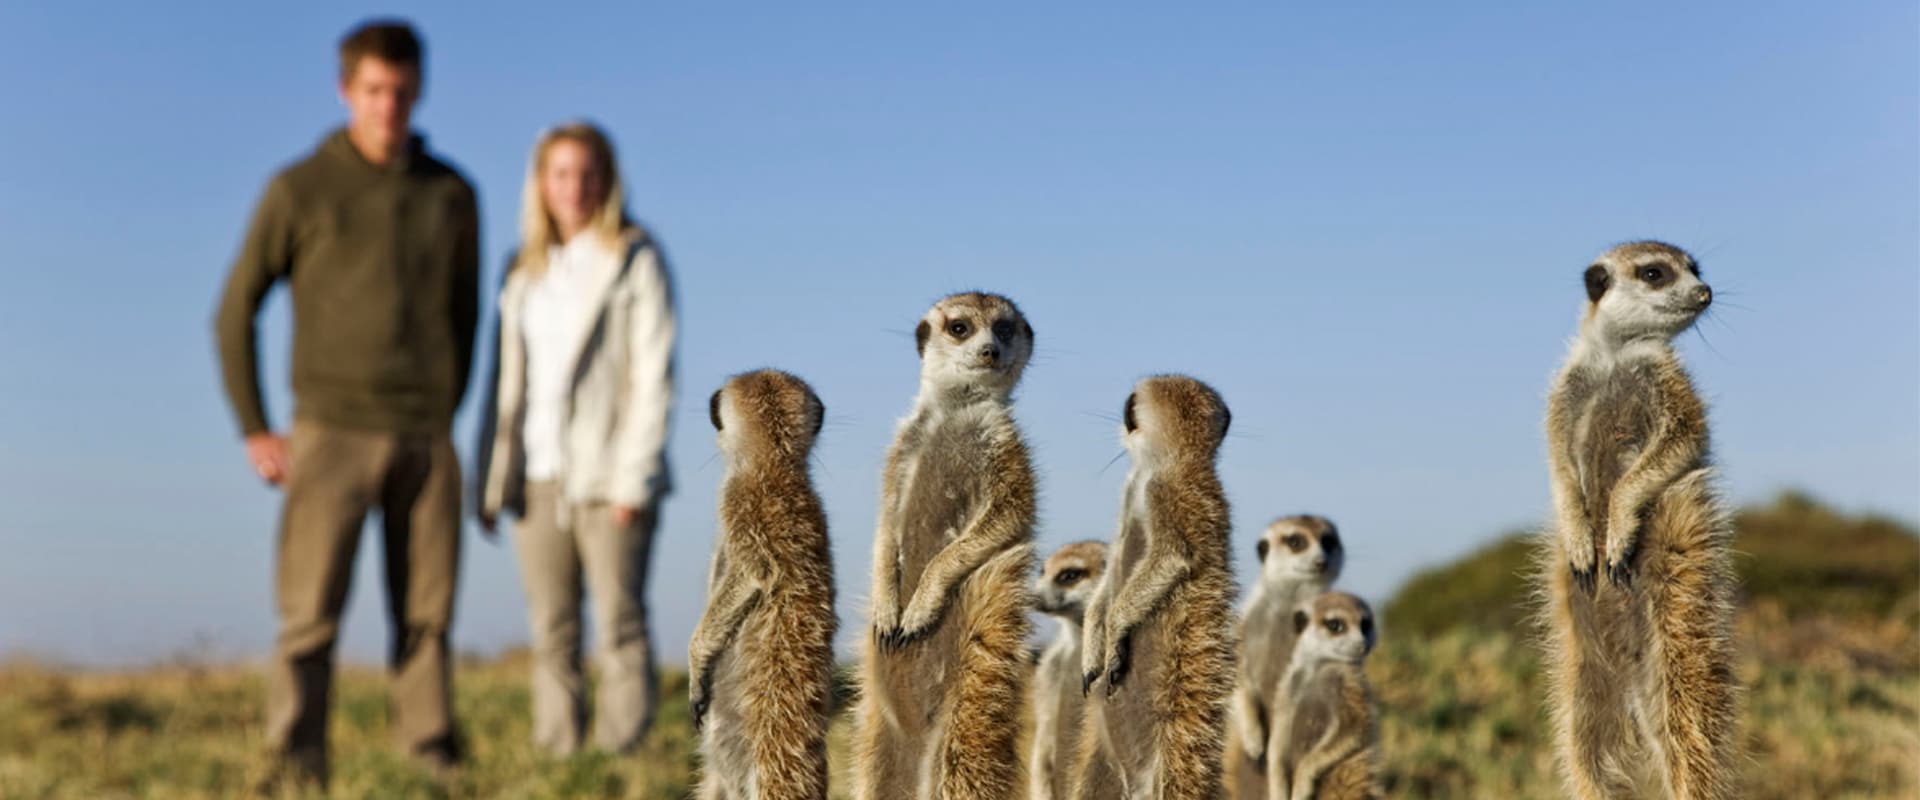 Get up close and personal with playful meerkats